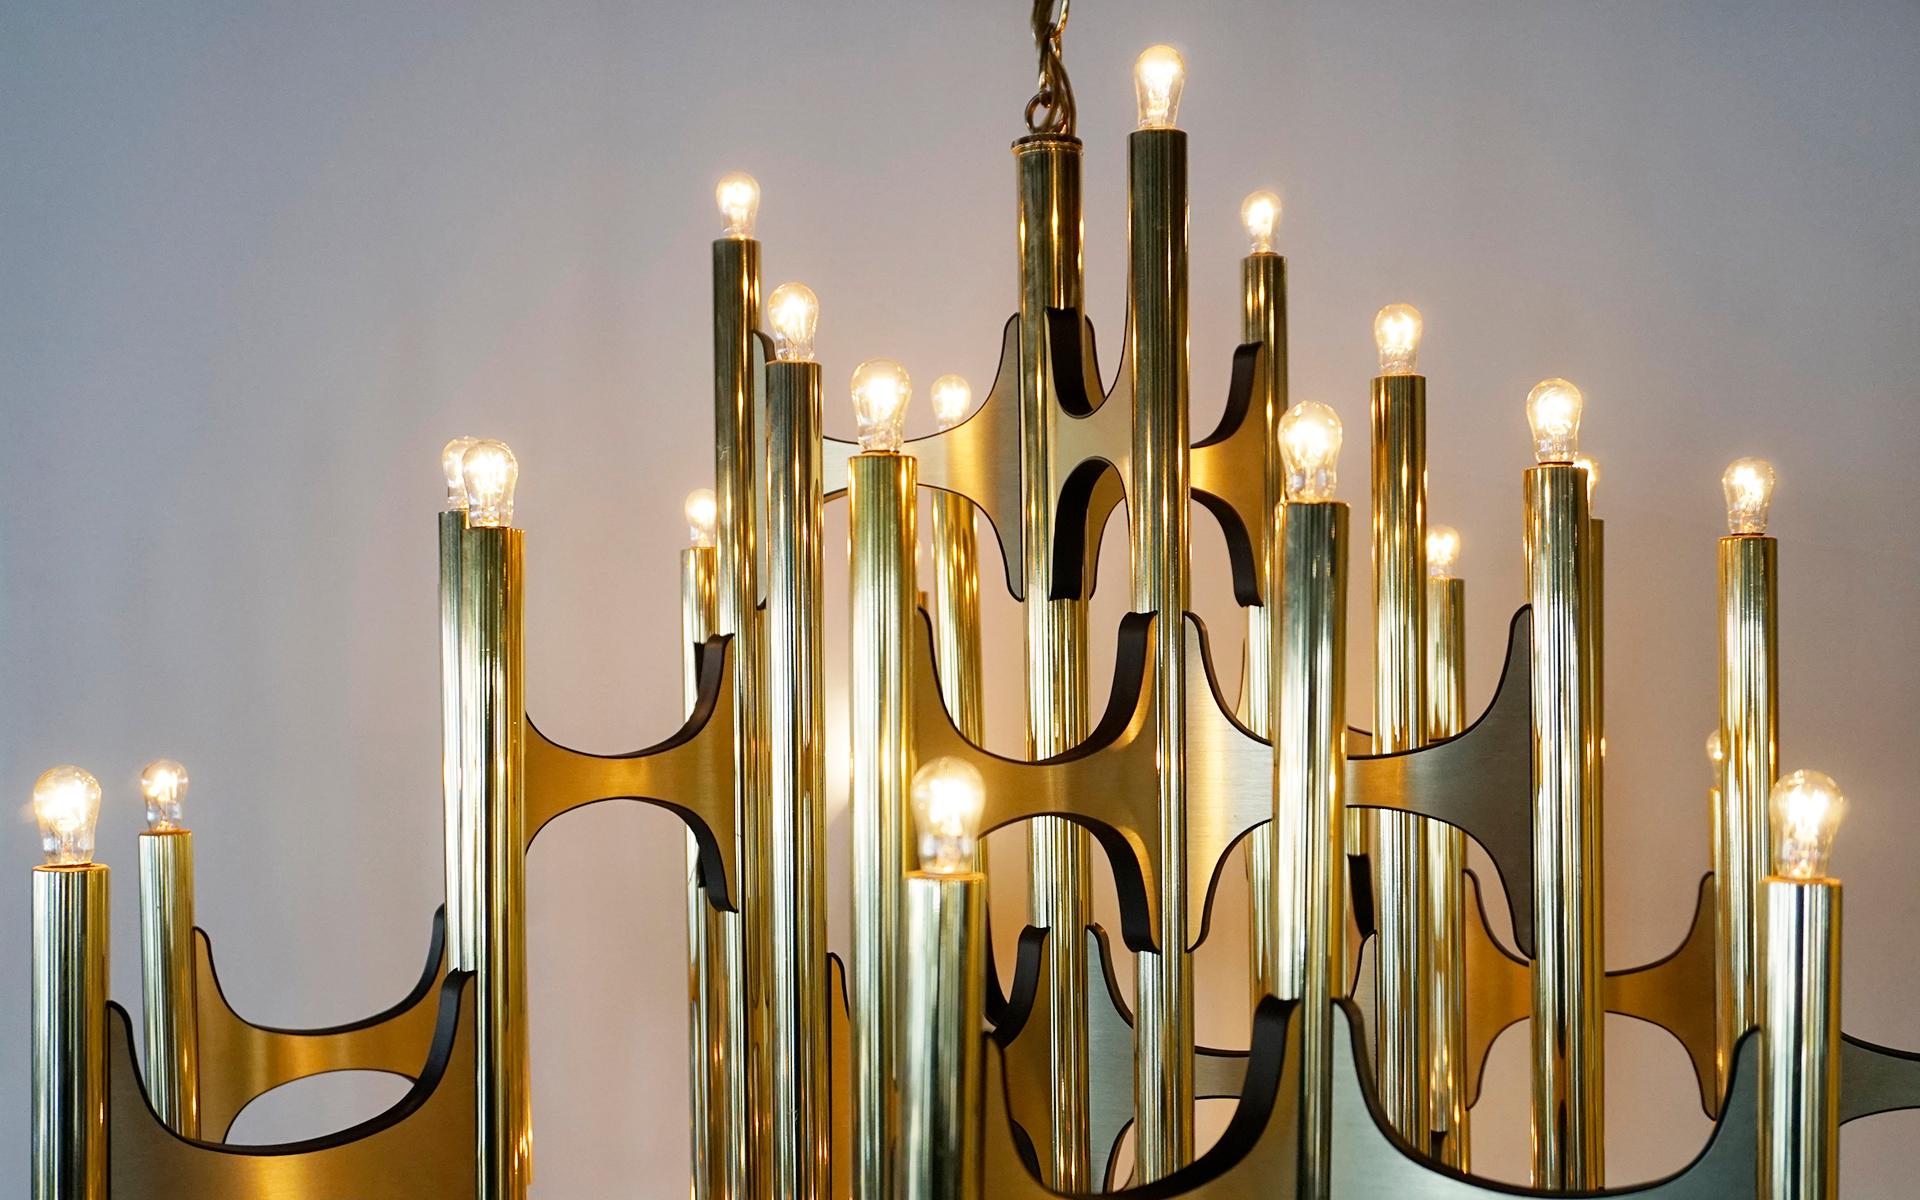 Fifty four light brass chandelier designed by Gaetano Sciolari for Lightolier. The largest, most rare version of this design. New light bulbs exactly like the originals. All sockets work and in great condition. This stunning light fixture is ready